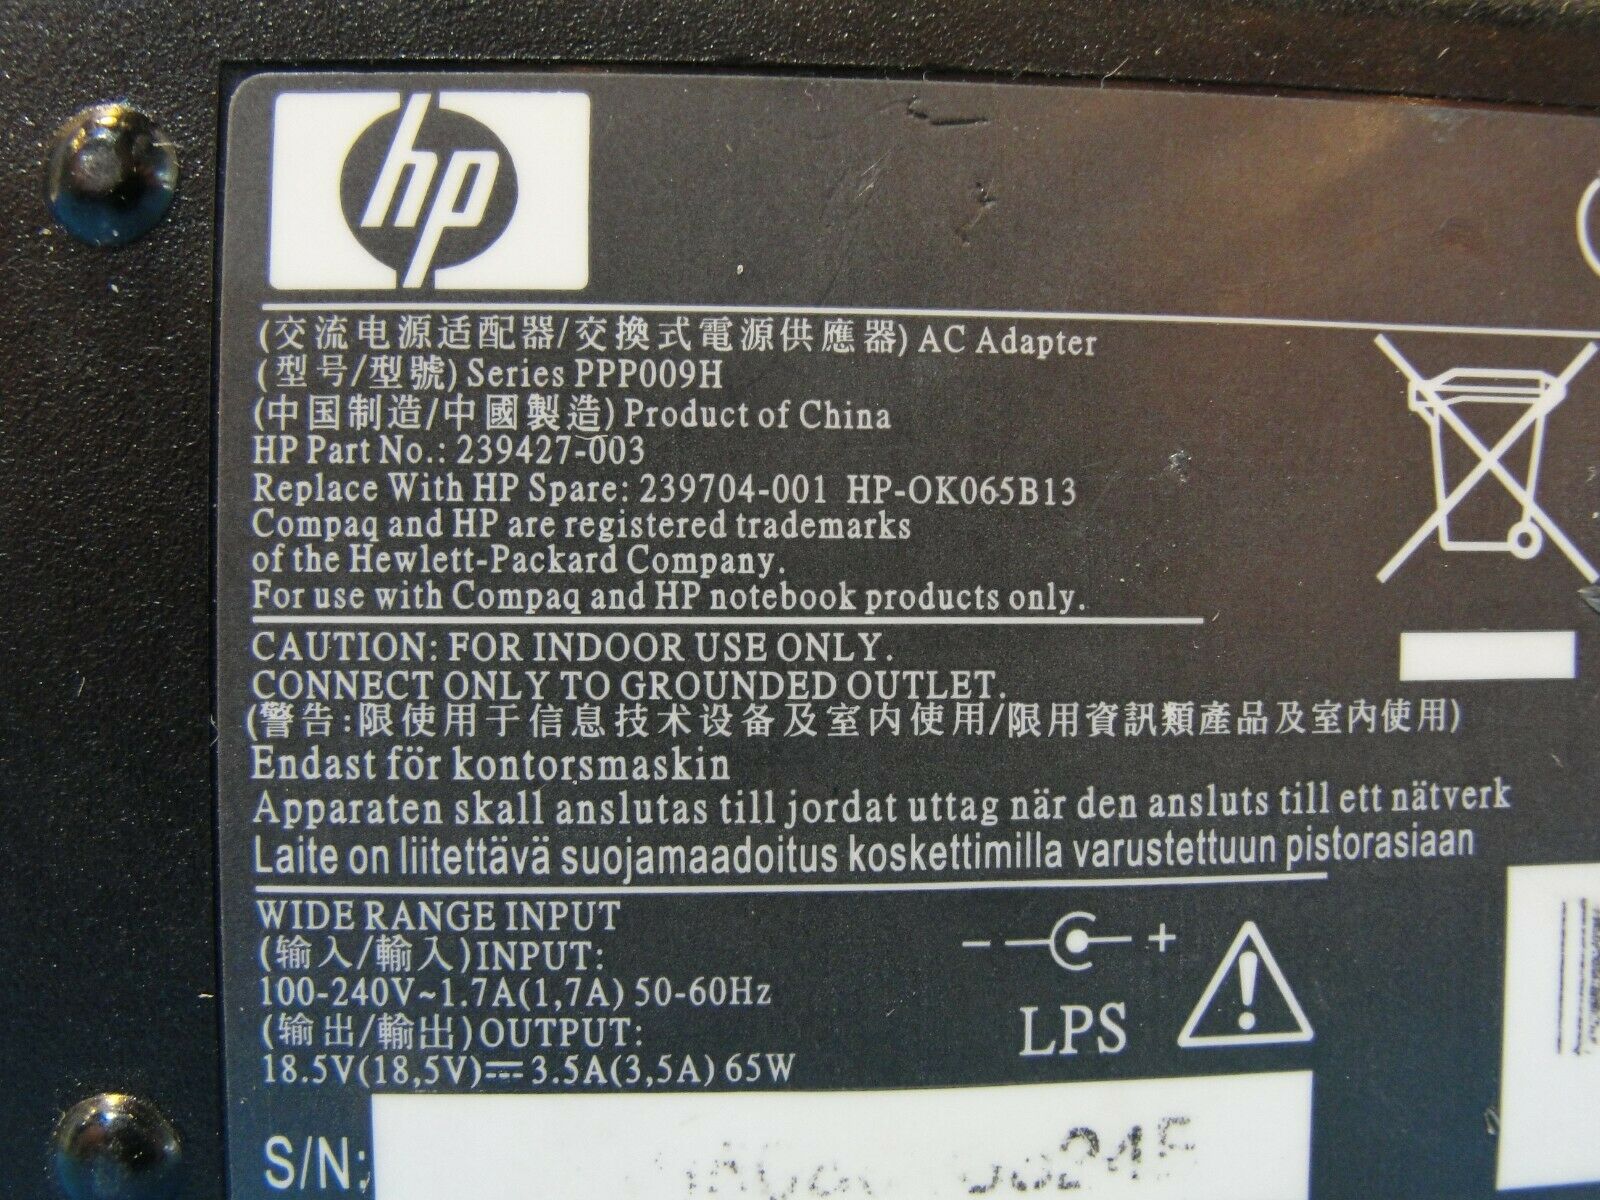 Genuine HP Power Adapter Charger PPP009H 239427-003 18.5V 3.5A 65W - Laptop Parts - Buy Authentic Computer Parts - Top Seller Ebay